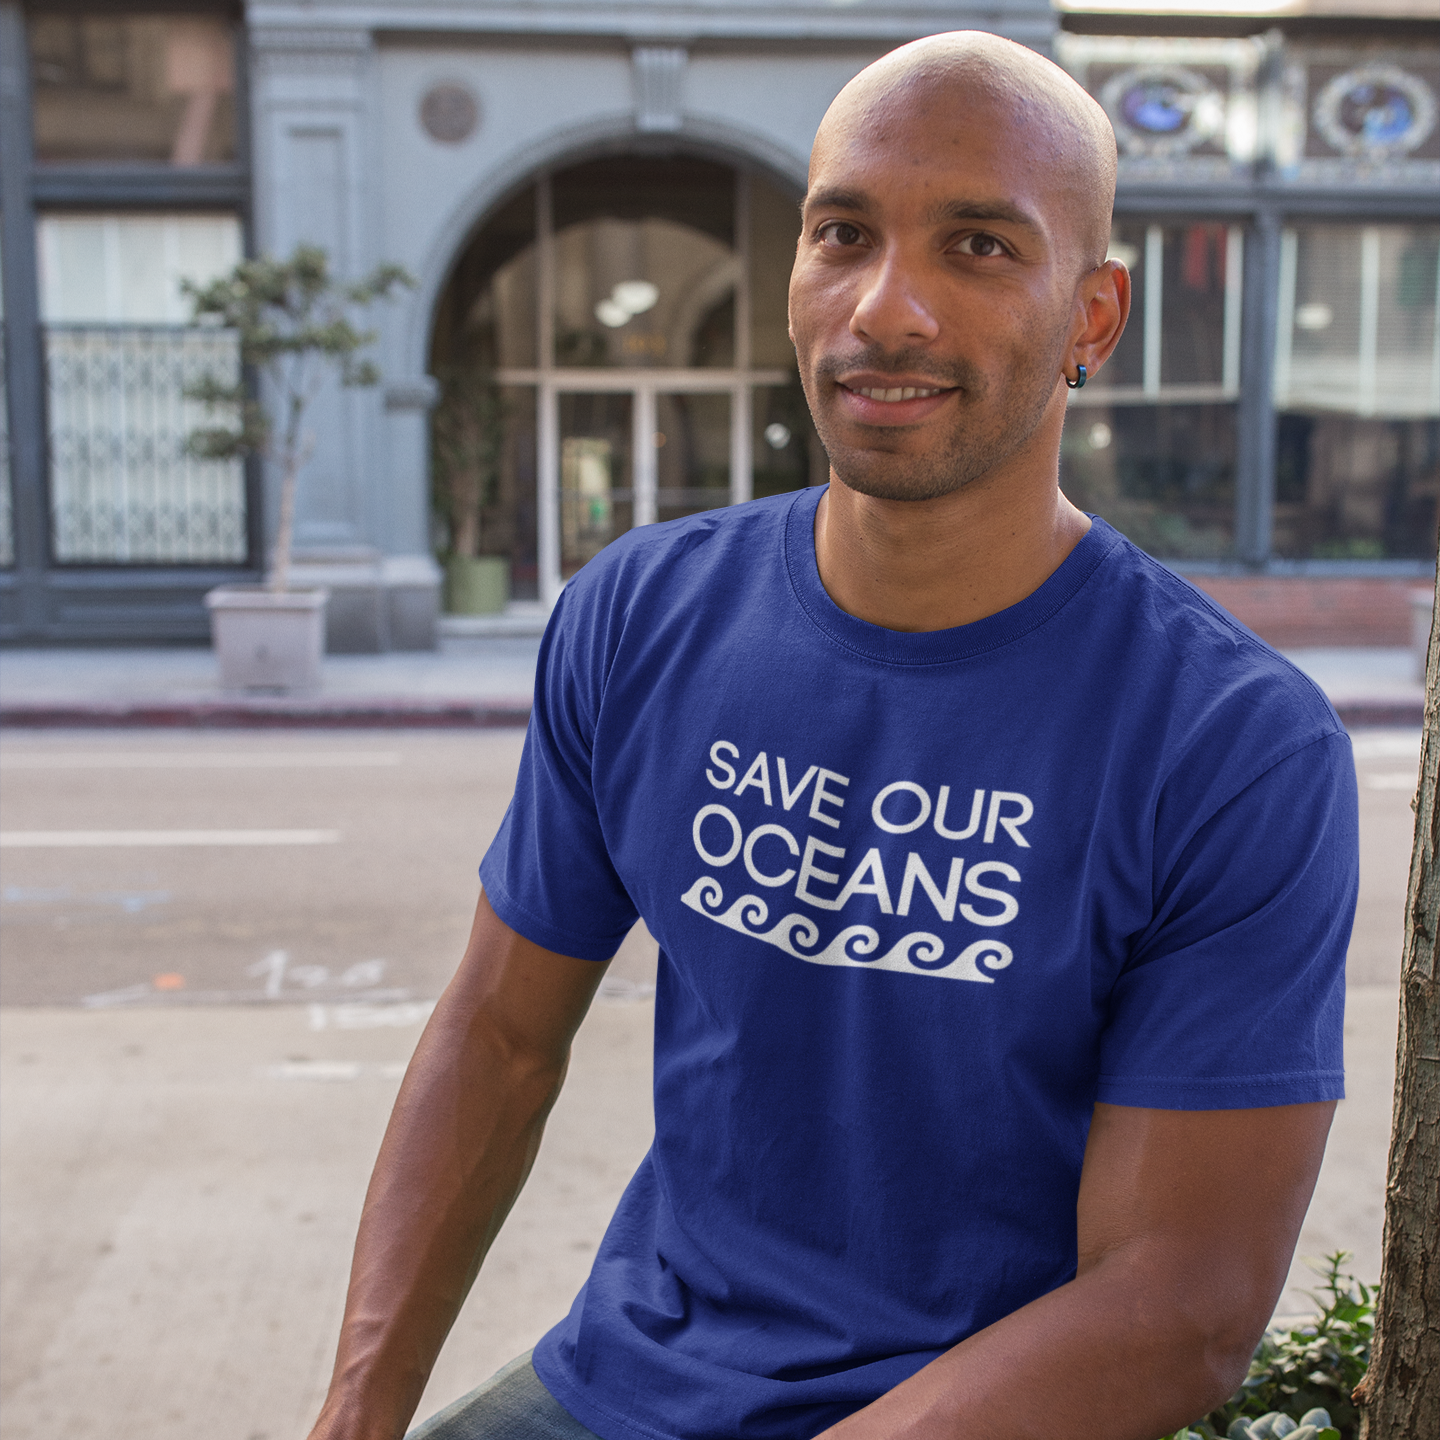 'Save our oceans' adult shirt